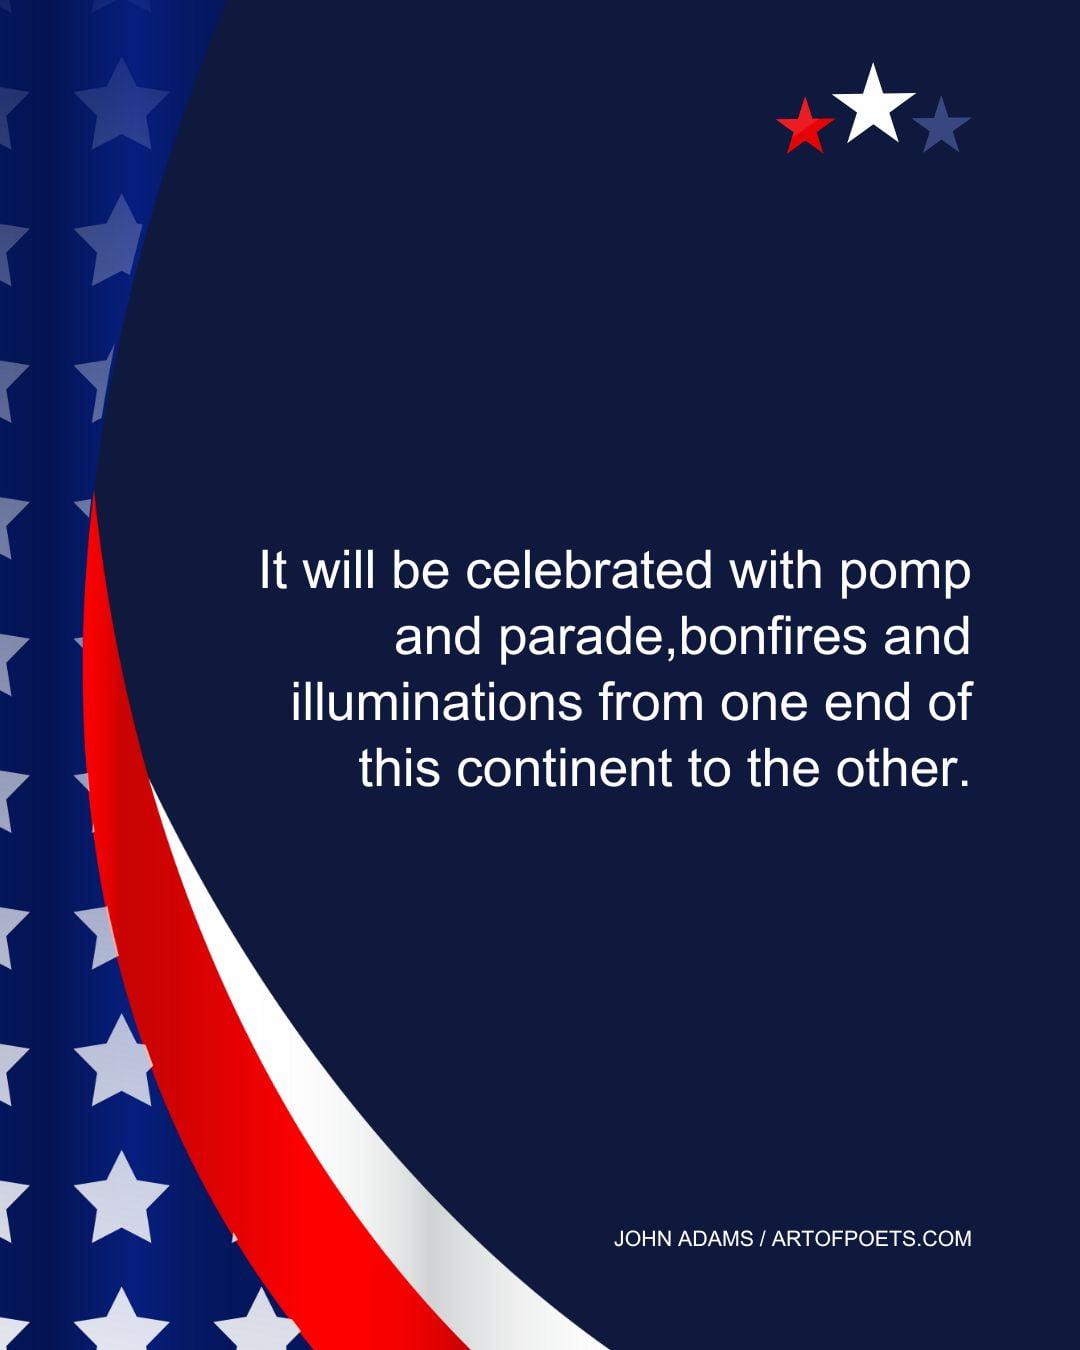 It will be celebrated with pomp and paradebonfires and illuminations from one end of this continent to the other